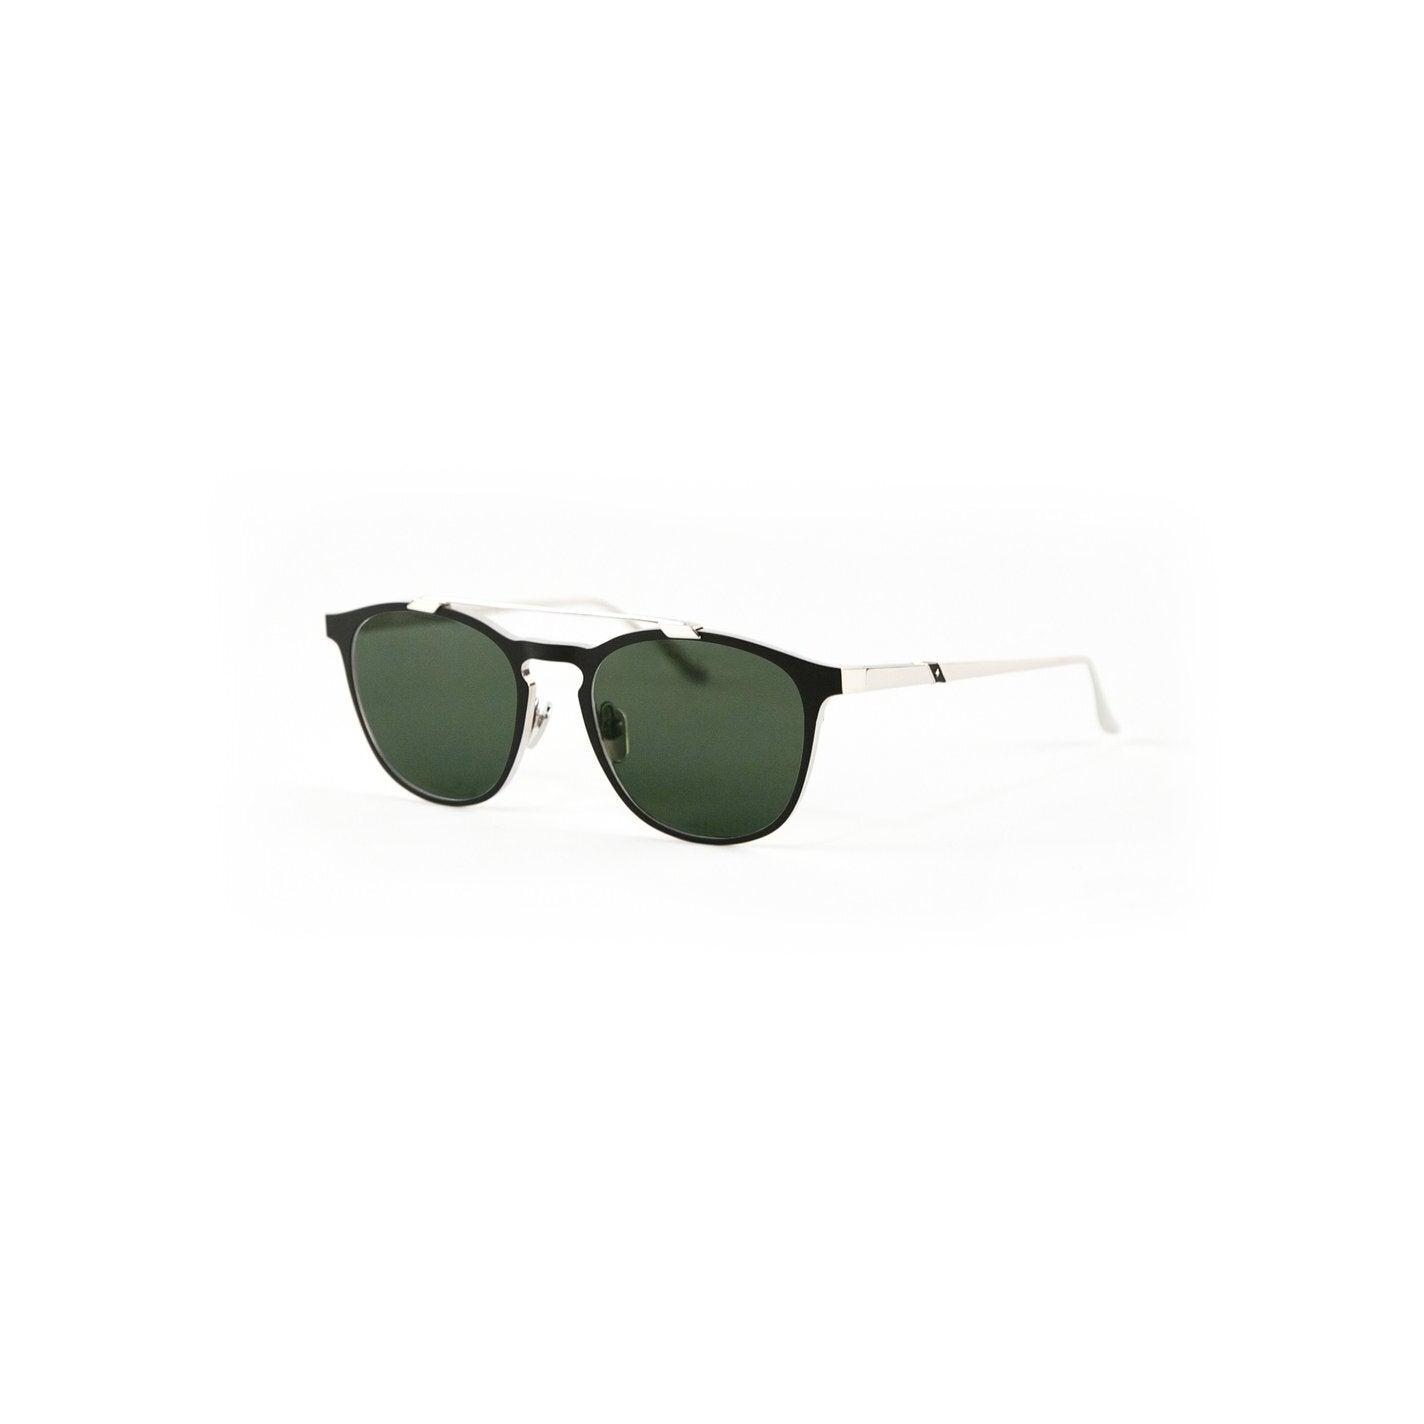 Leisure Society Eze 53 Silver and Black Sunglasses